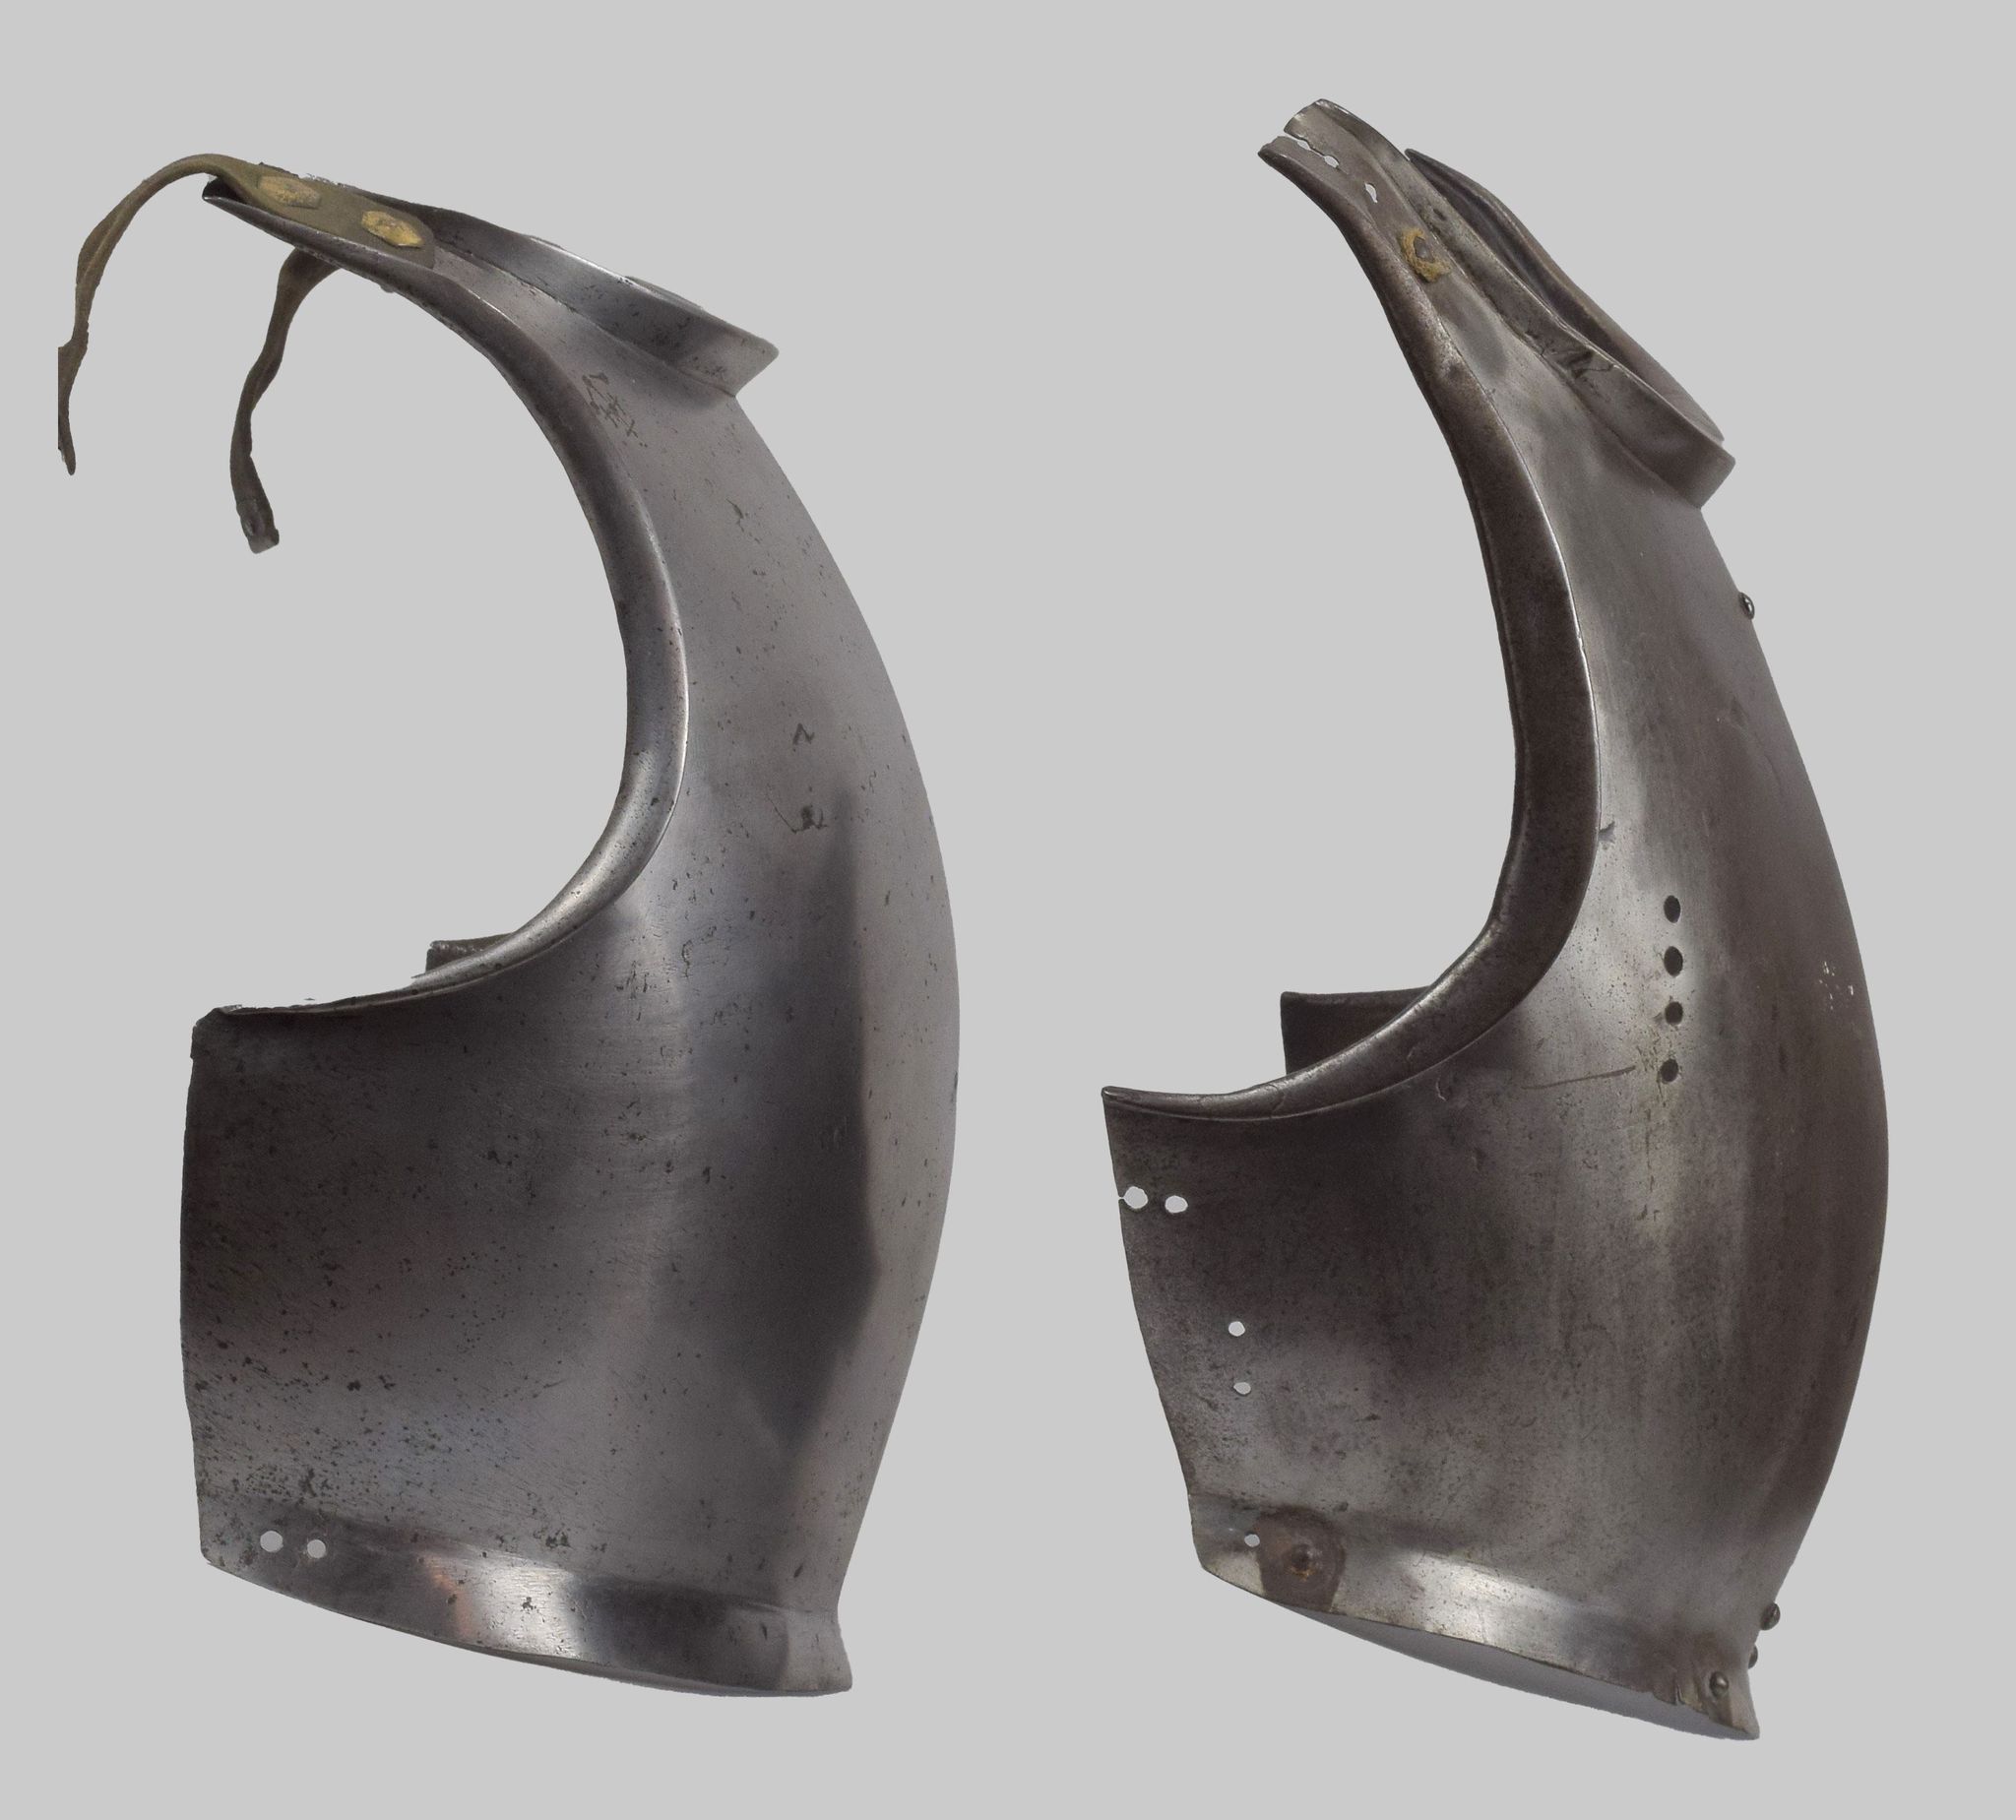 Breastplate - A-321-A-66-profiles-side-by-side-bigger